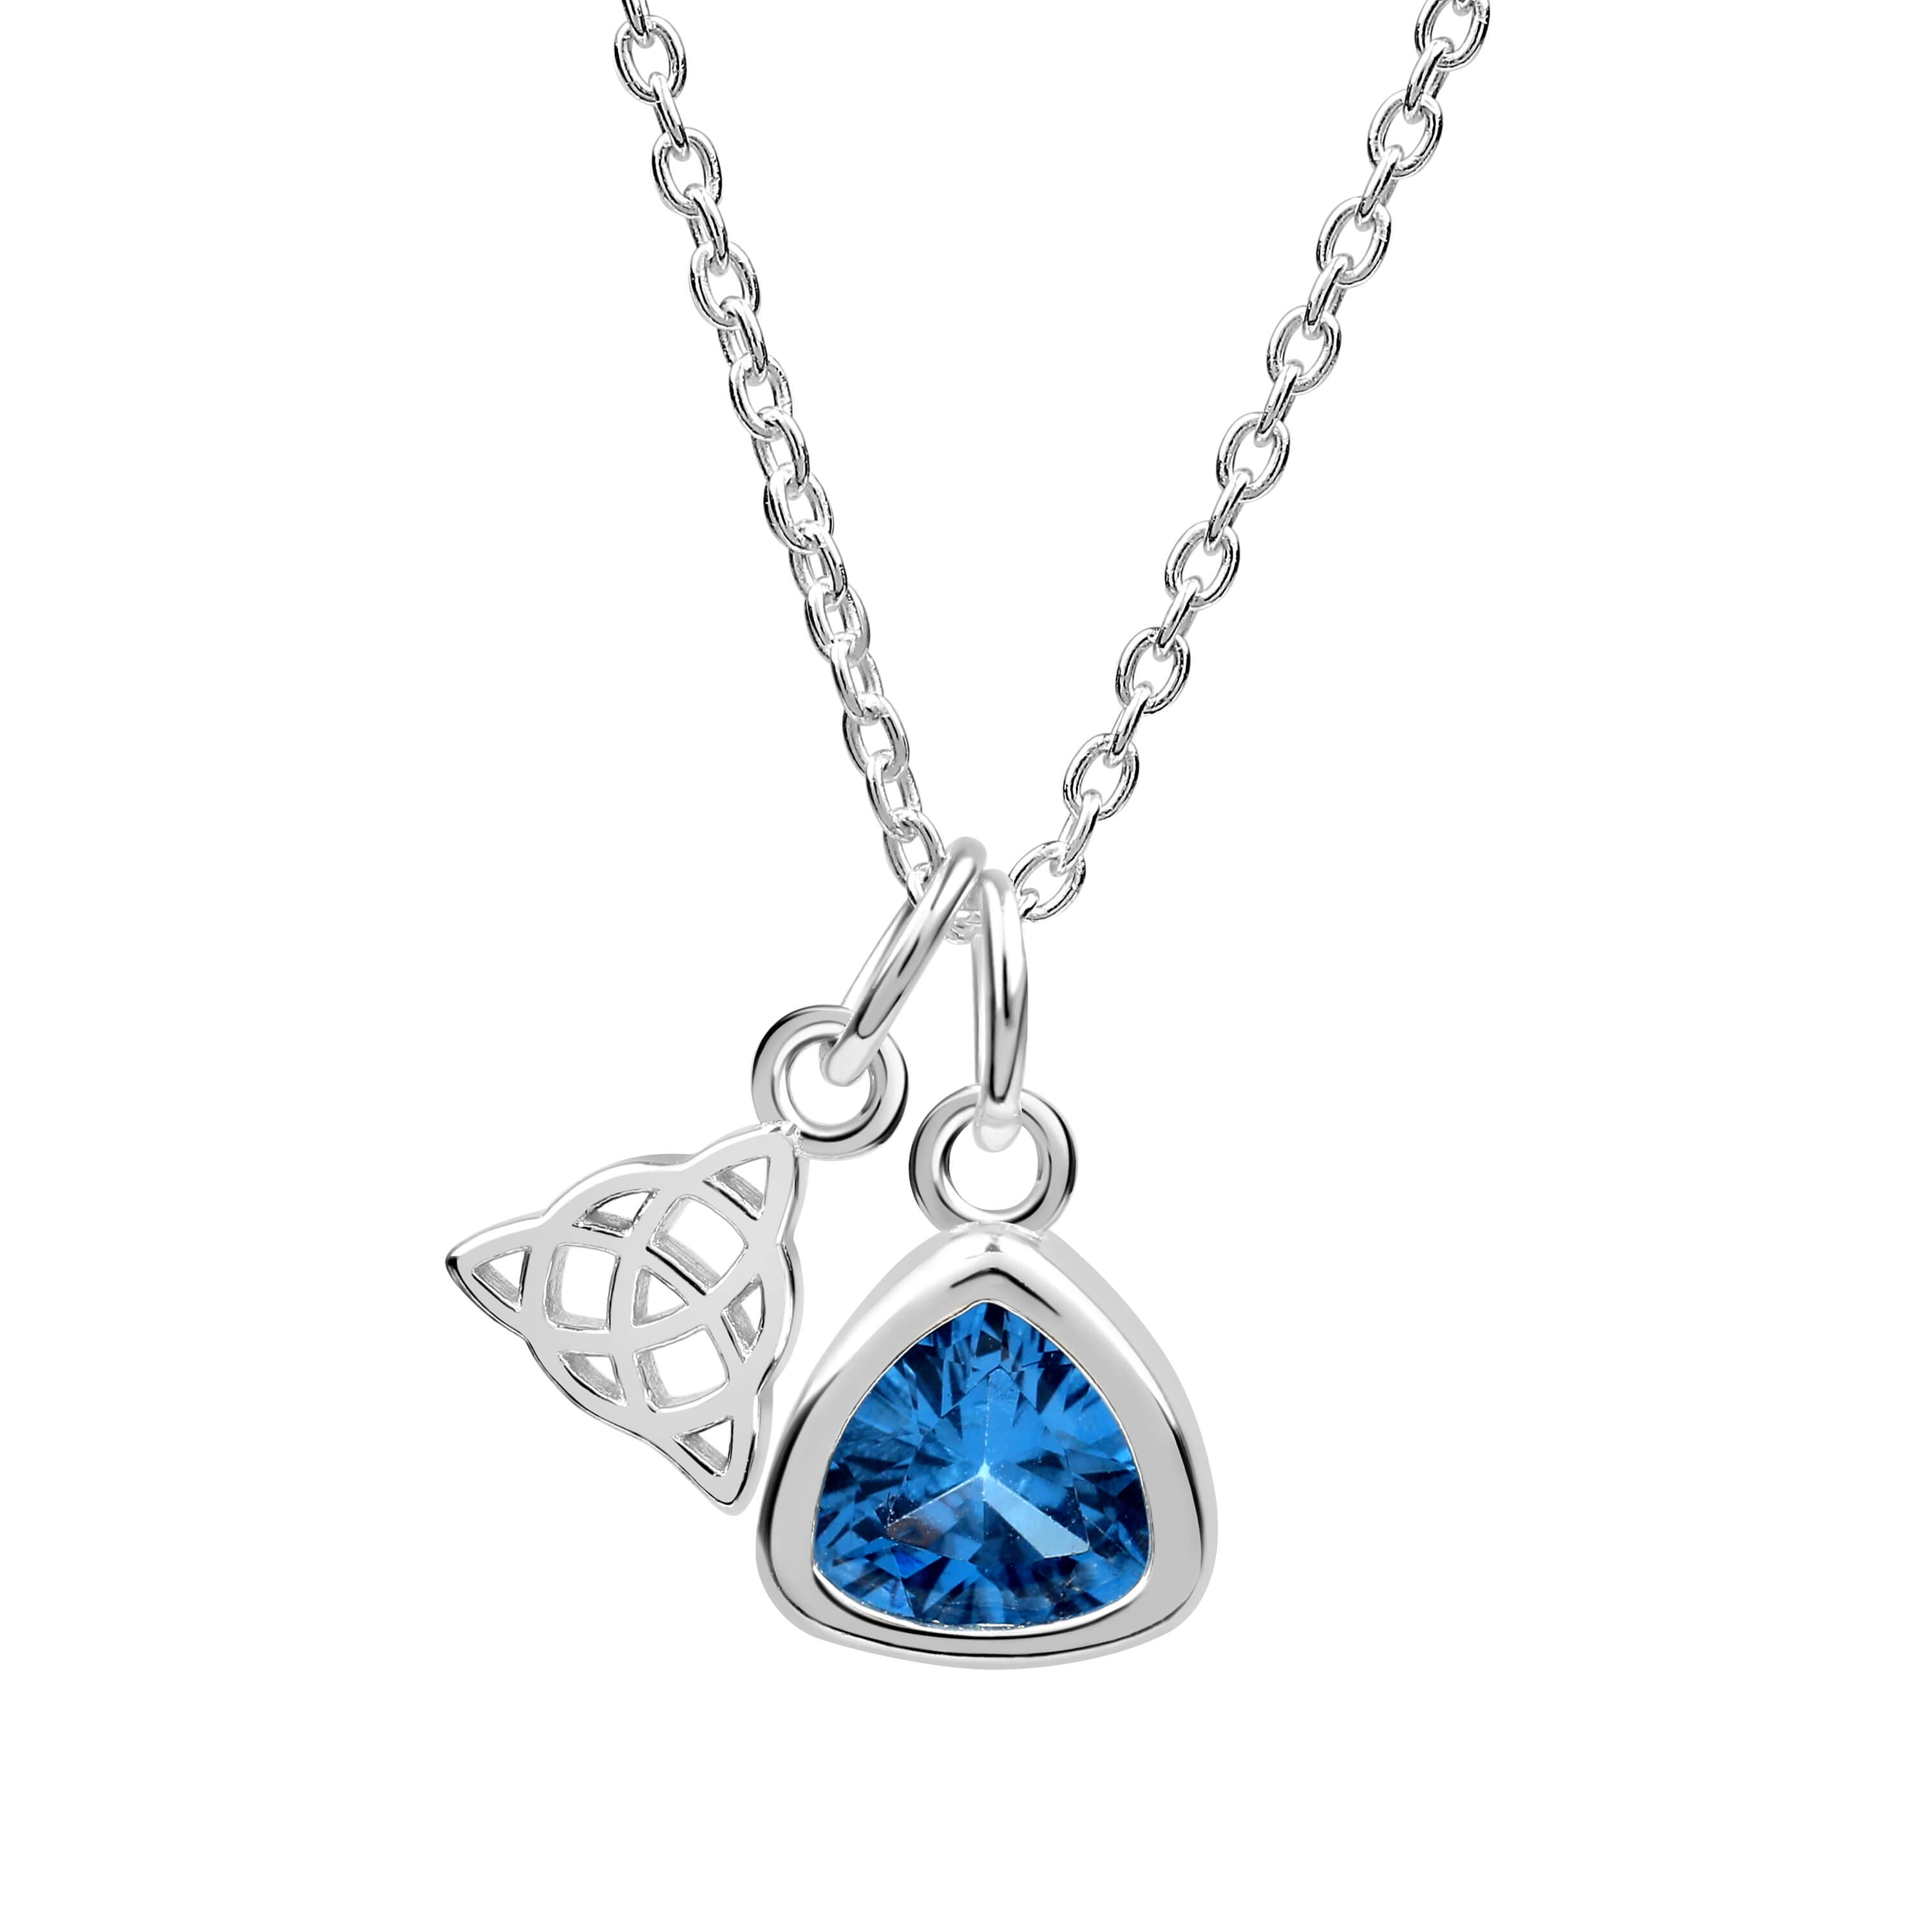 Triquetra Charm with Birthstone Necklace